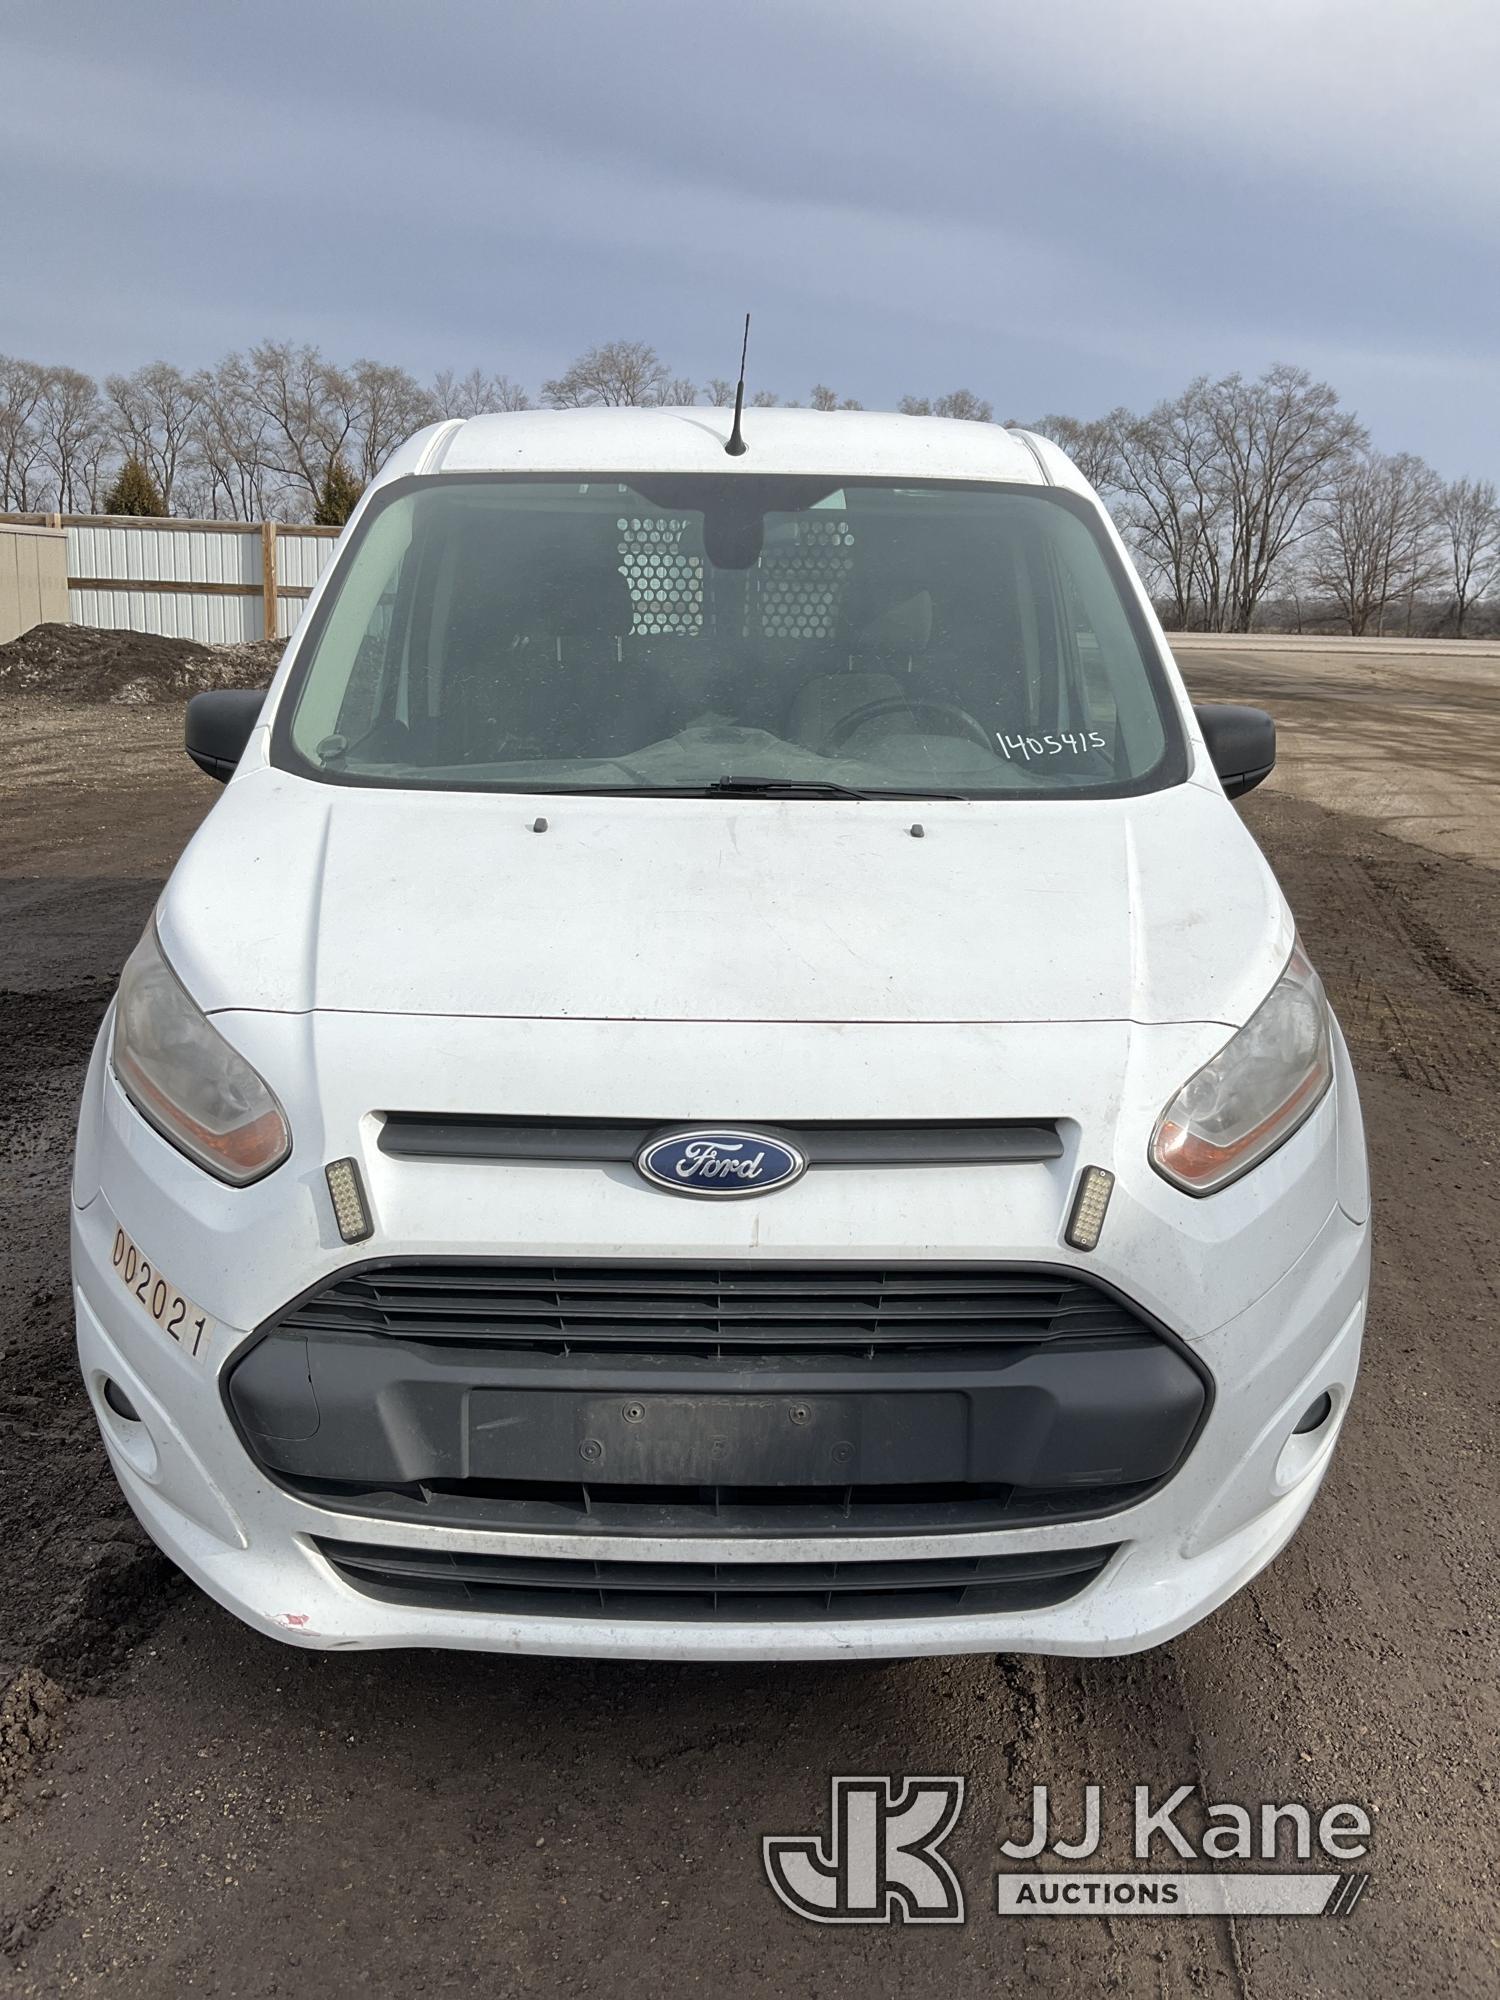 (South Beloit, IL) 2014 Ford Transit Connect Cargo Van Runs, Hard To Move When Warm-No Reverse-Trans